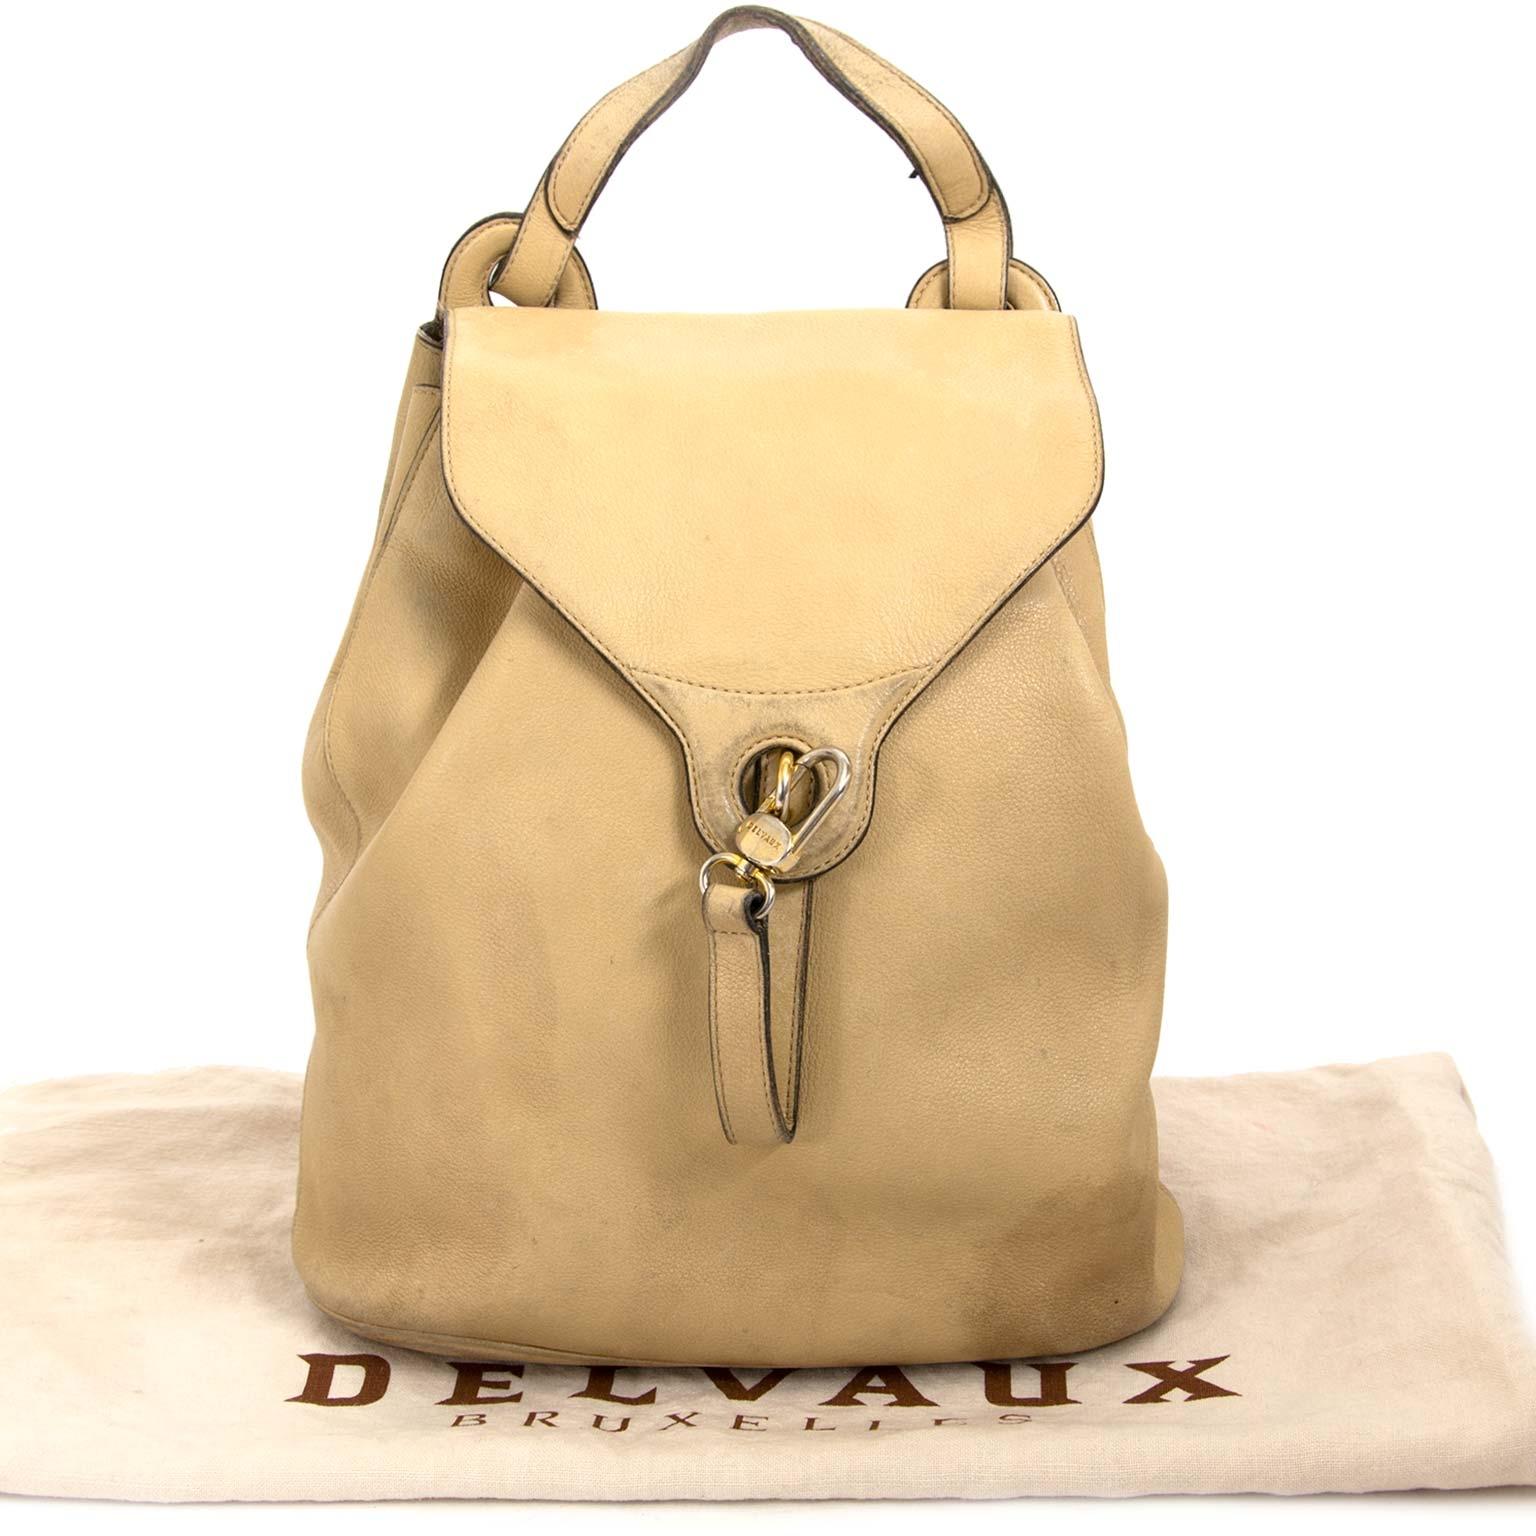 Good preloved condition

Delvaux Beige Cerceau Backpack

This backpack is the ideal travel companion, perfect to fit all your essentials.
the bag opens with a silver toned buckle and has an extra zip pocket on the back. The shoulder straps are